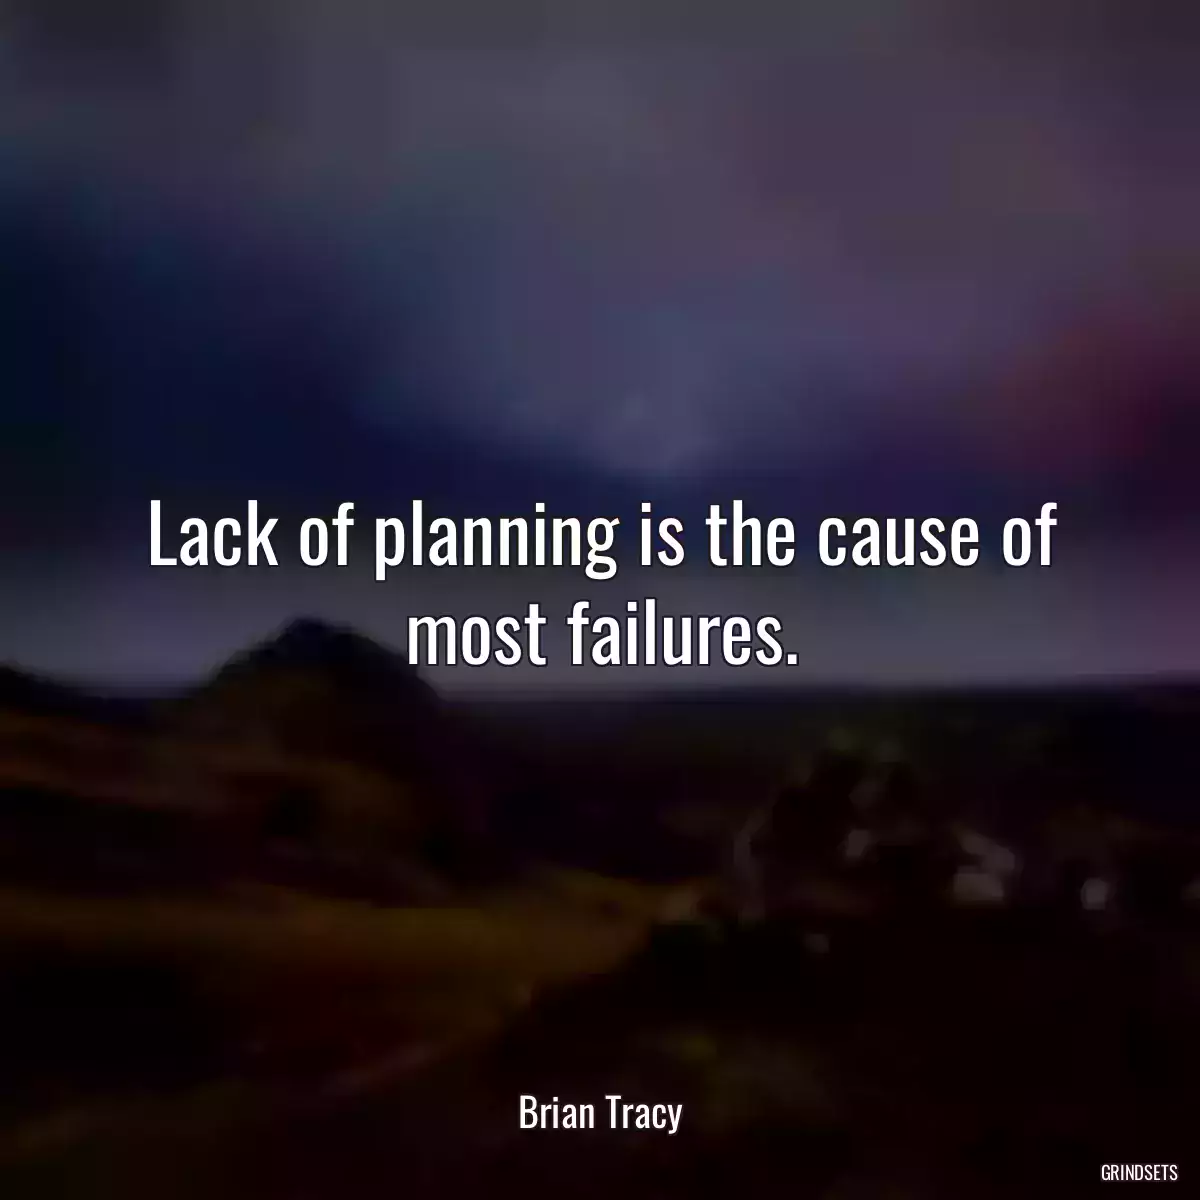 Lack of planning is the cause of most failures.